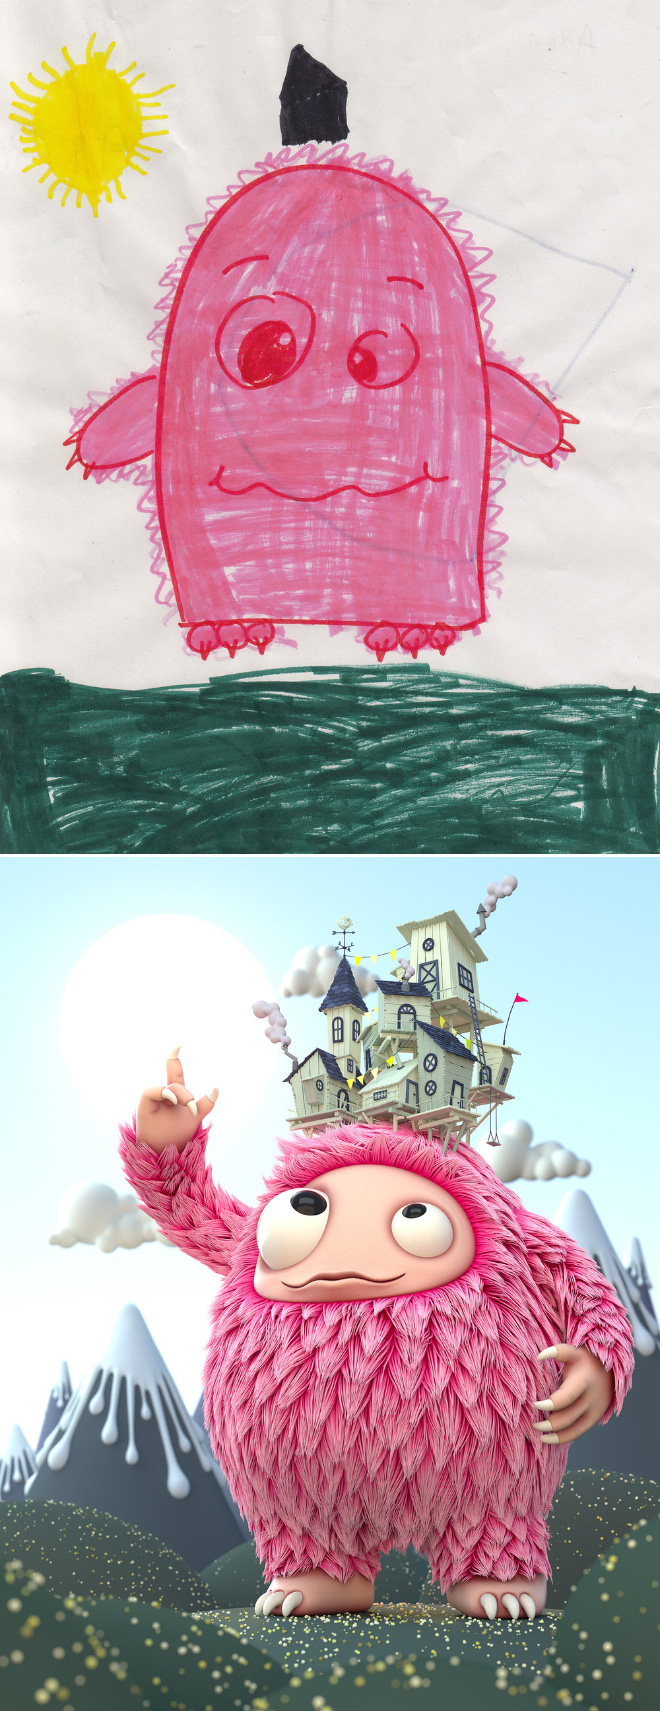 Kids' drawing recreated by a professional artist.